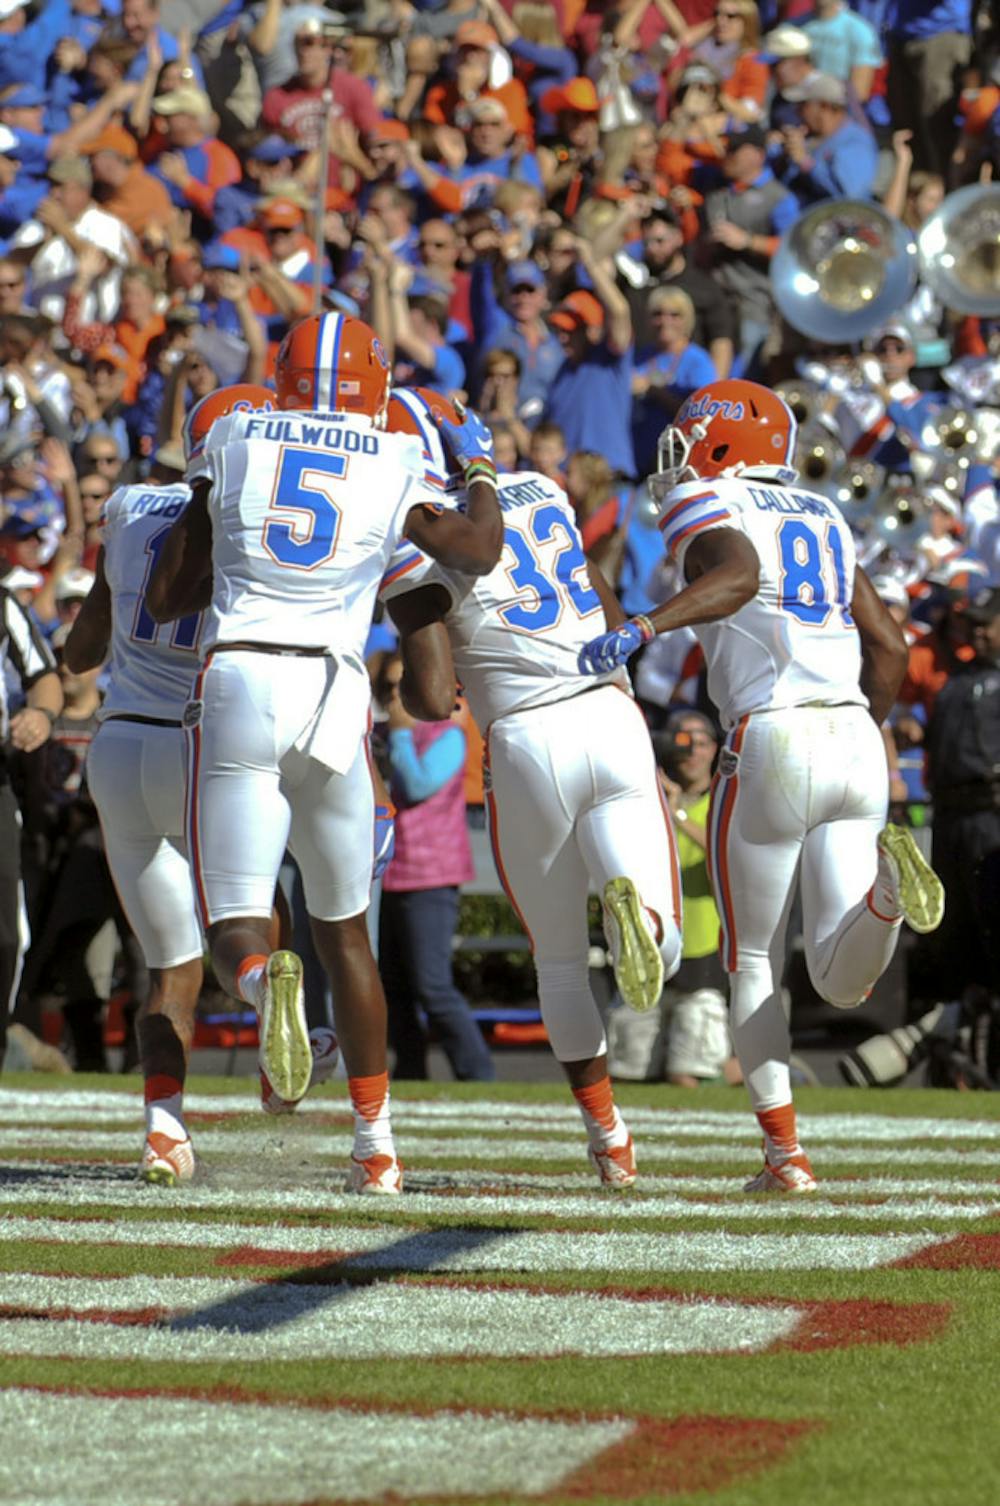 <p>UF players celebrate with running back Jordan Cronkrite after his 41-yard touchdown during Florida's 24-14 win against South Carolina on Nov. 14, 2015, at Williams-Brice Stadium in Columbia, South Carolina.</p>